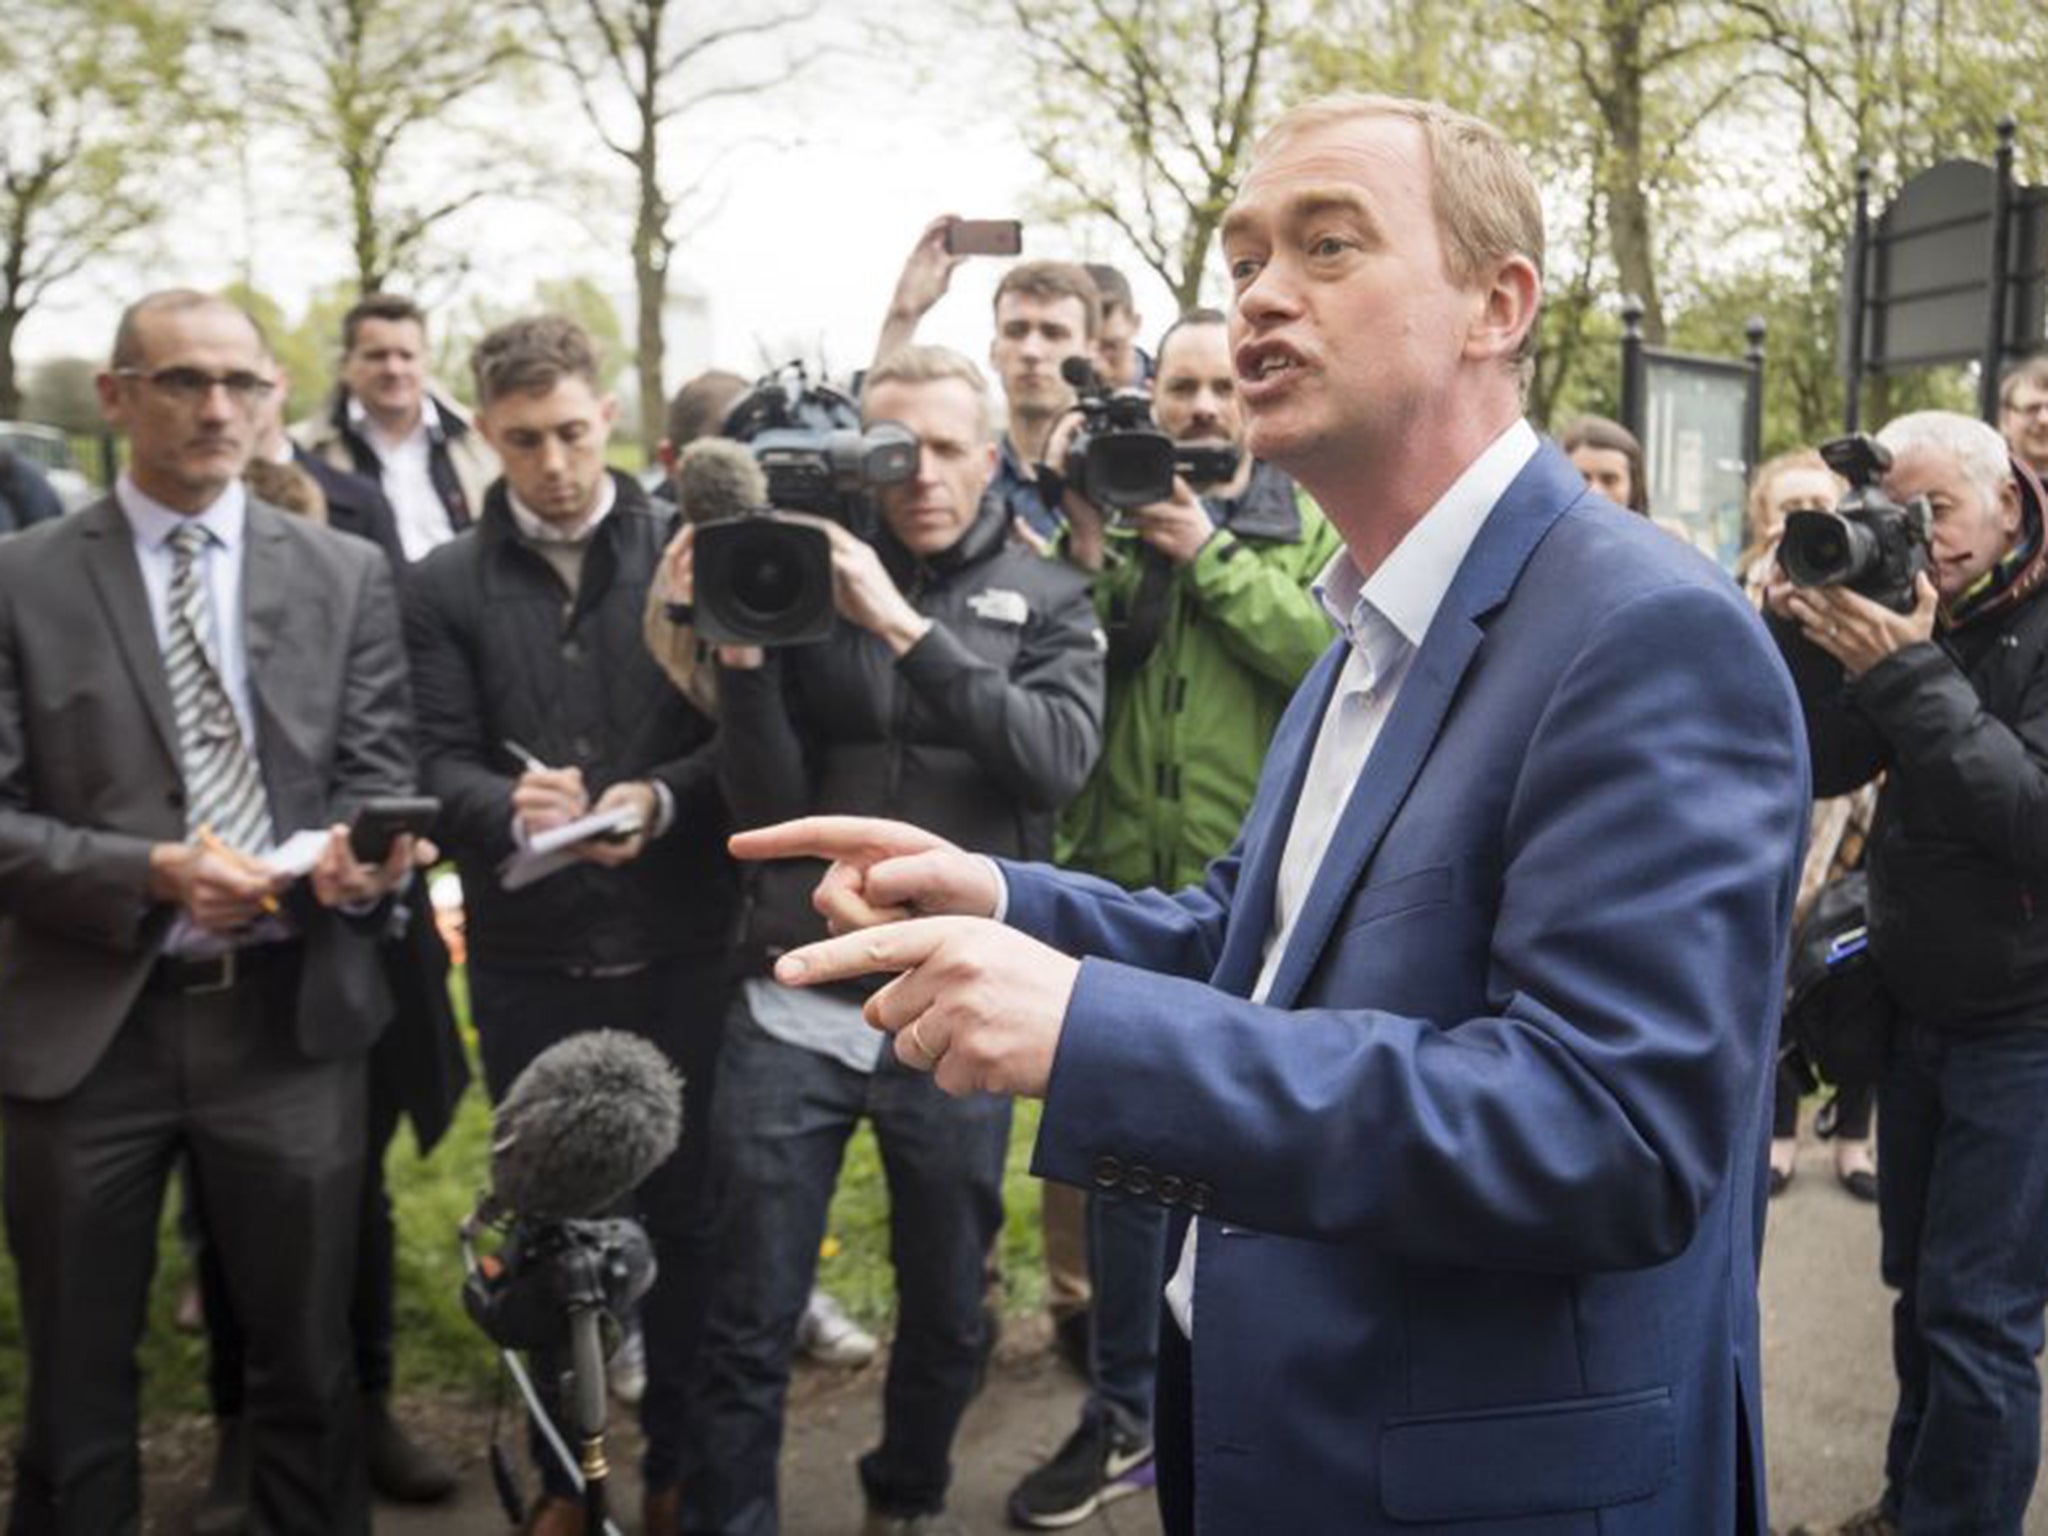 An enthusiastic Tim Farron campaigning in Manchester